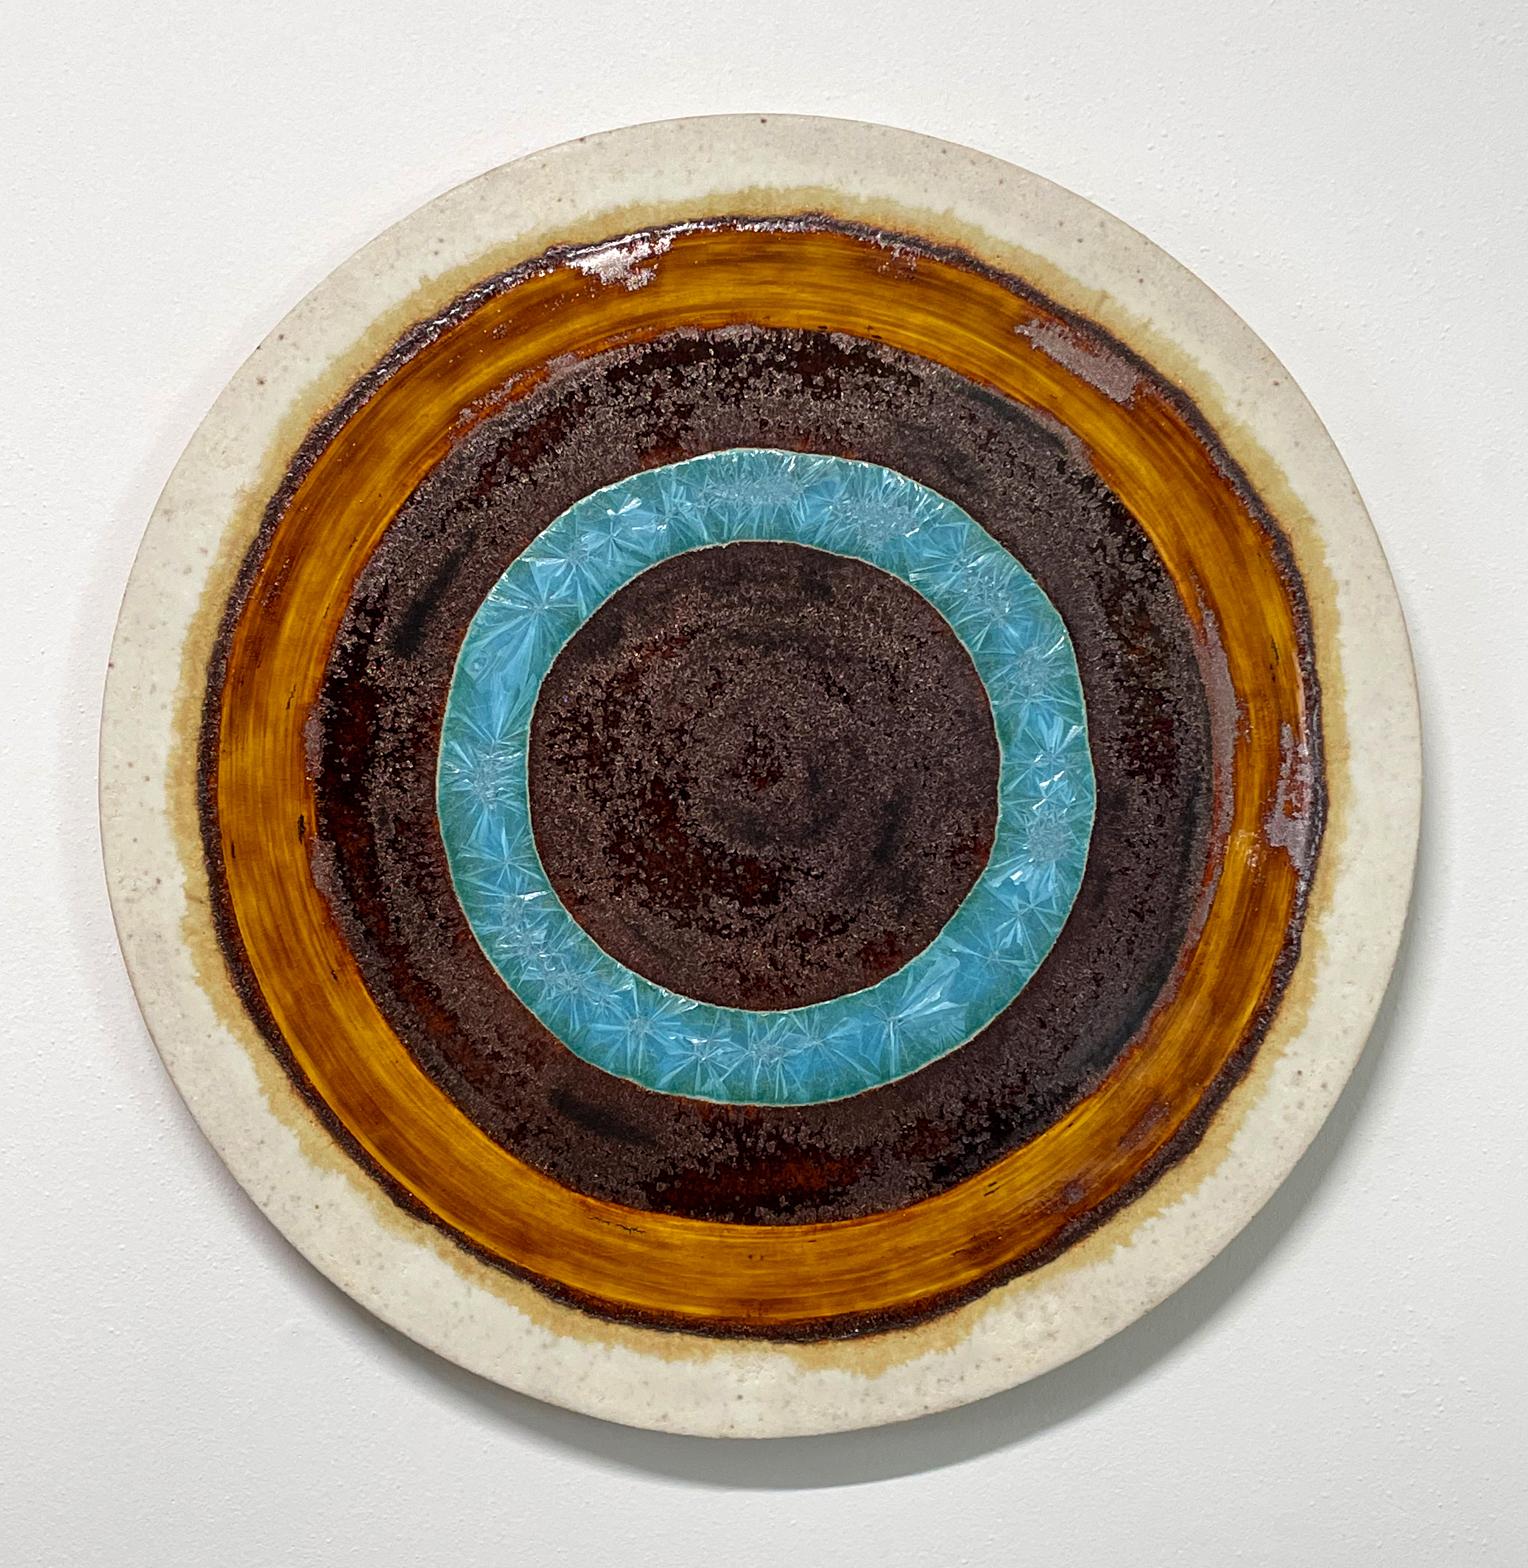 Crystal Revolution
Ceramic painting by William Edwards
Hand rolled earthenware circular slab glazed in amber and turquoise crystals. 

William received his BFA in sculpture from the historic San Francisco Art Institute and his MFA from UC Davis.